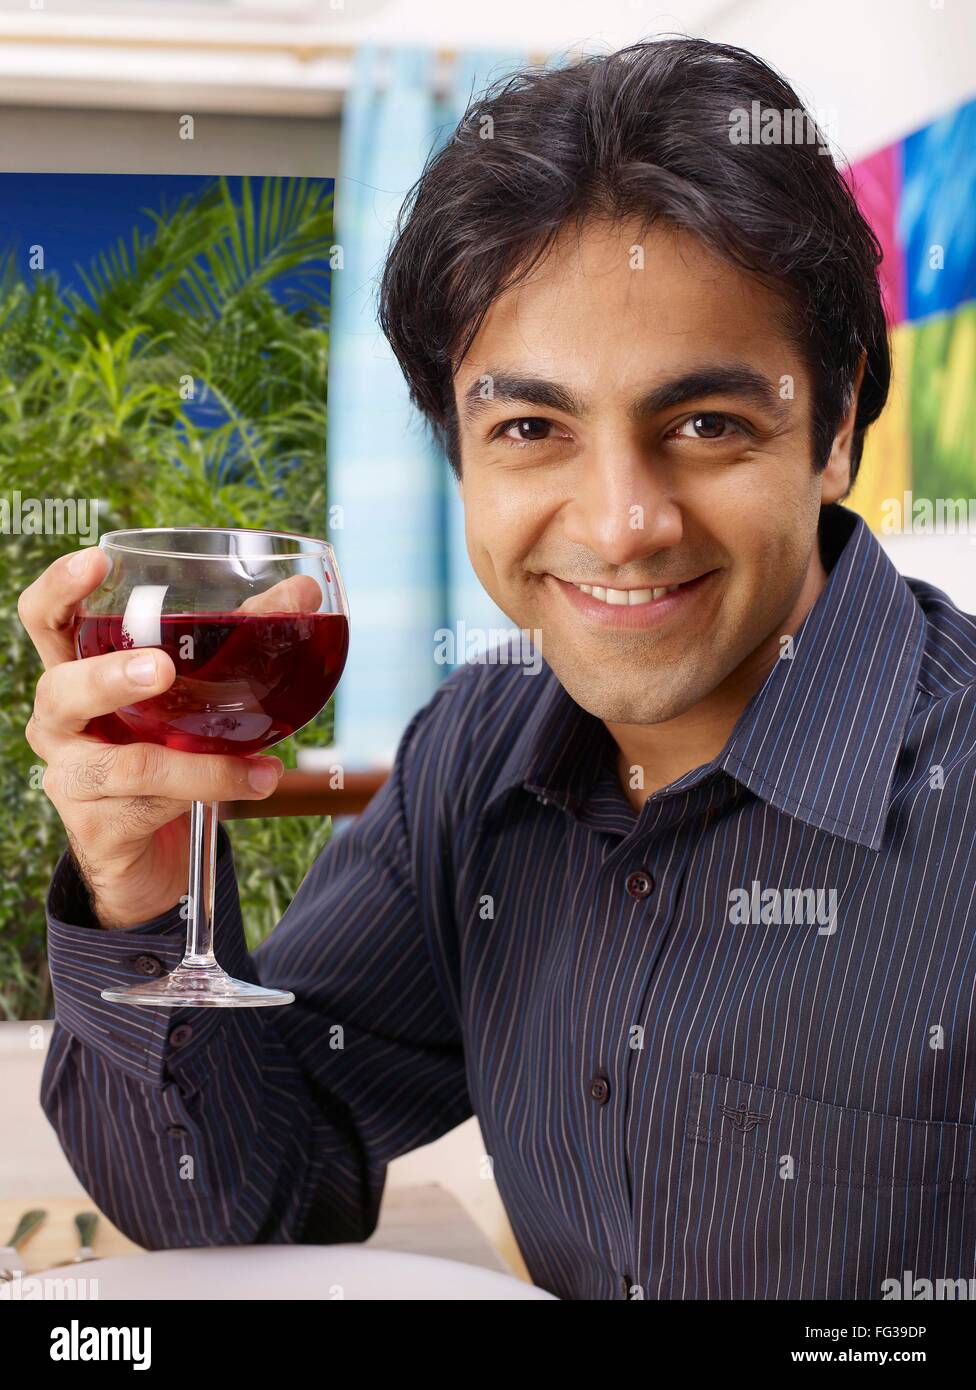 Young man showing red wine glass MR#702V Stock Photo